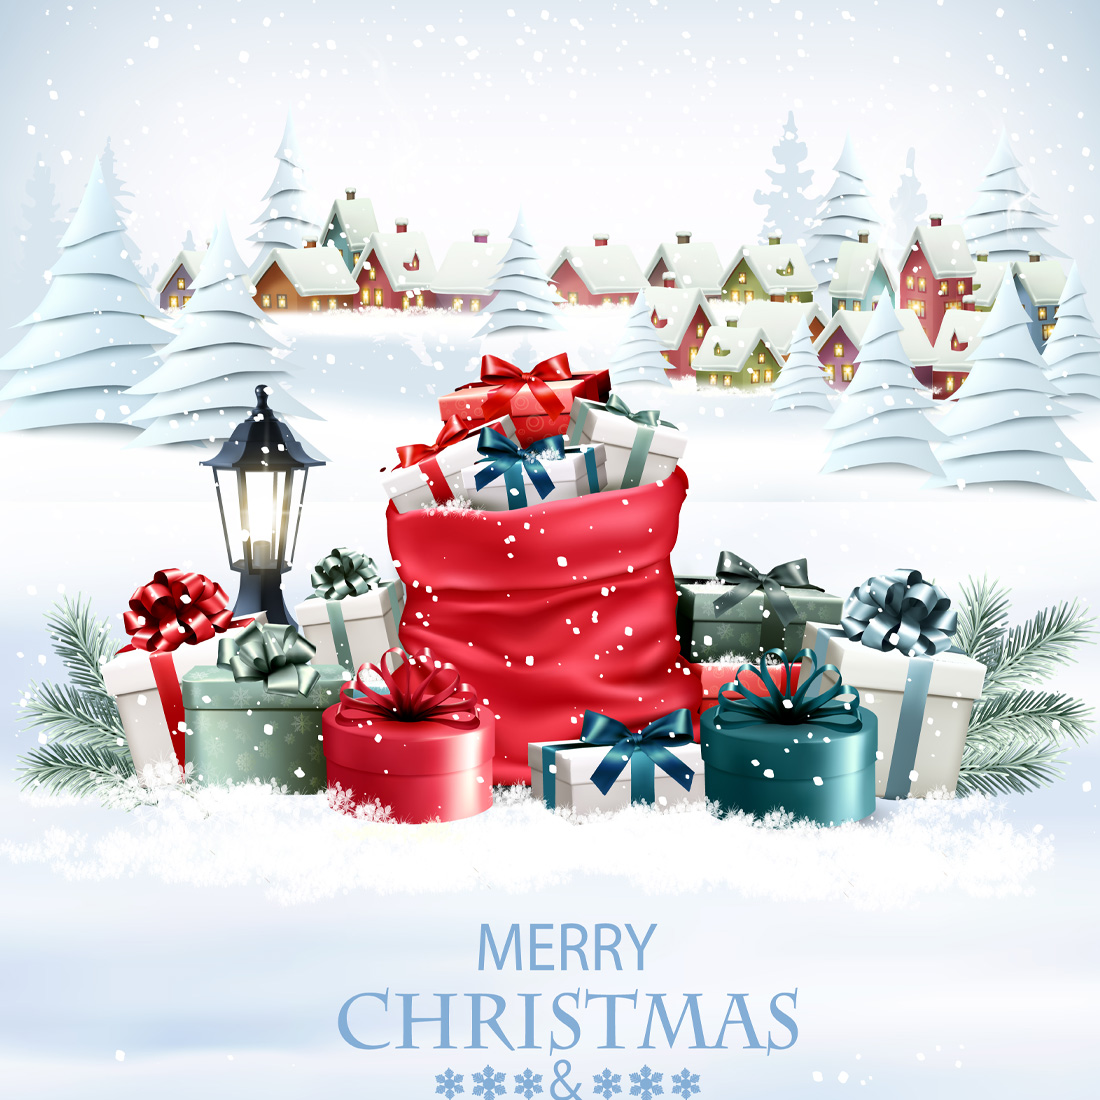 Christmas holiday background with a red sack full presents and a winter village  preview image.